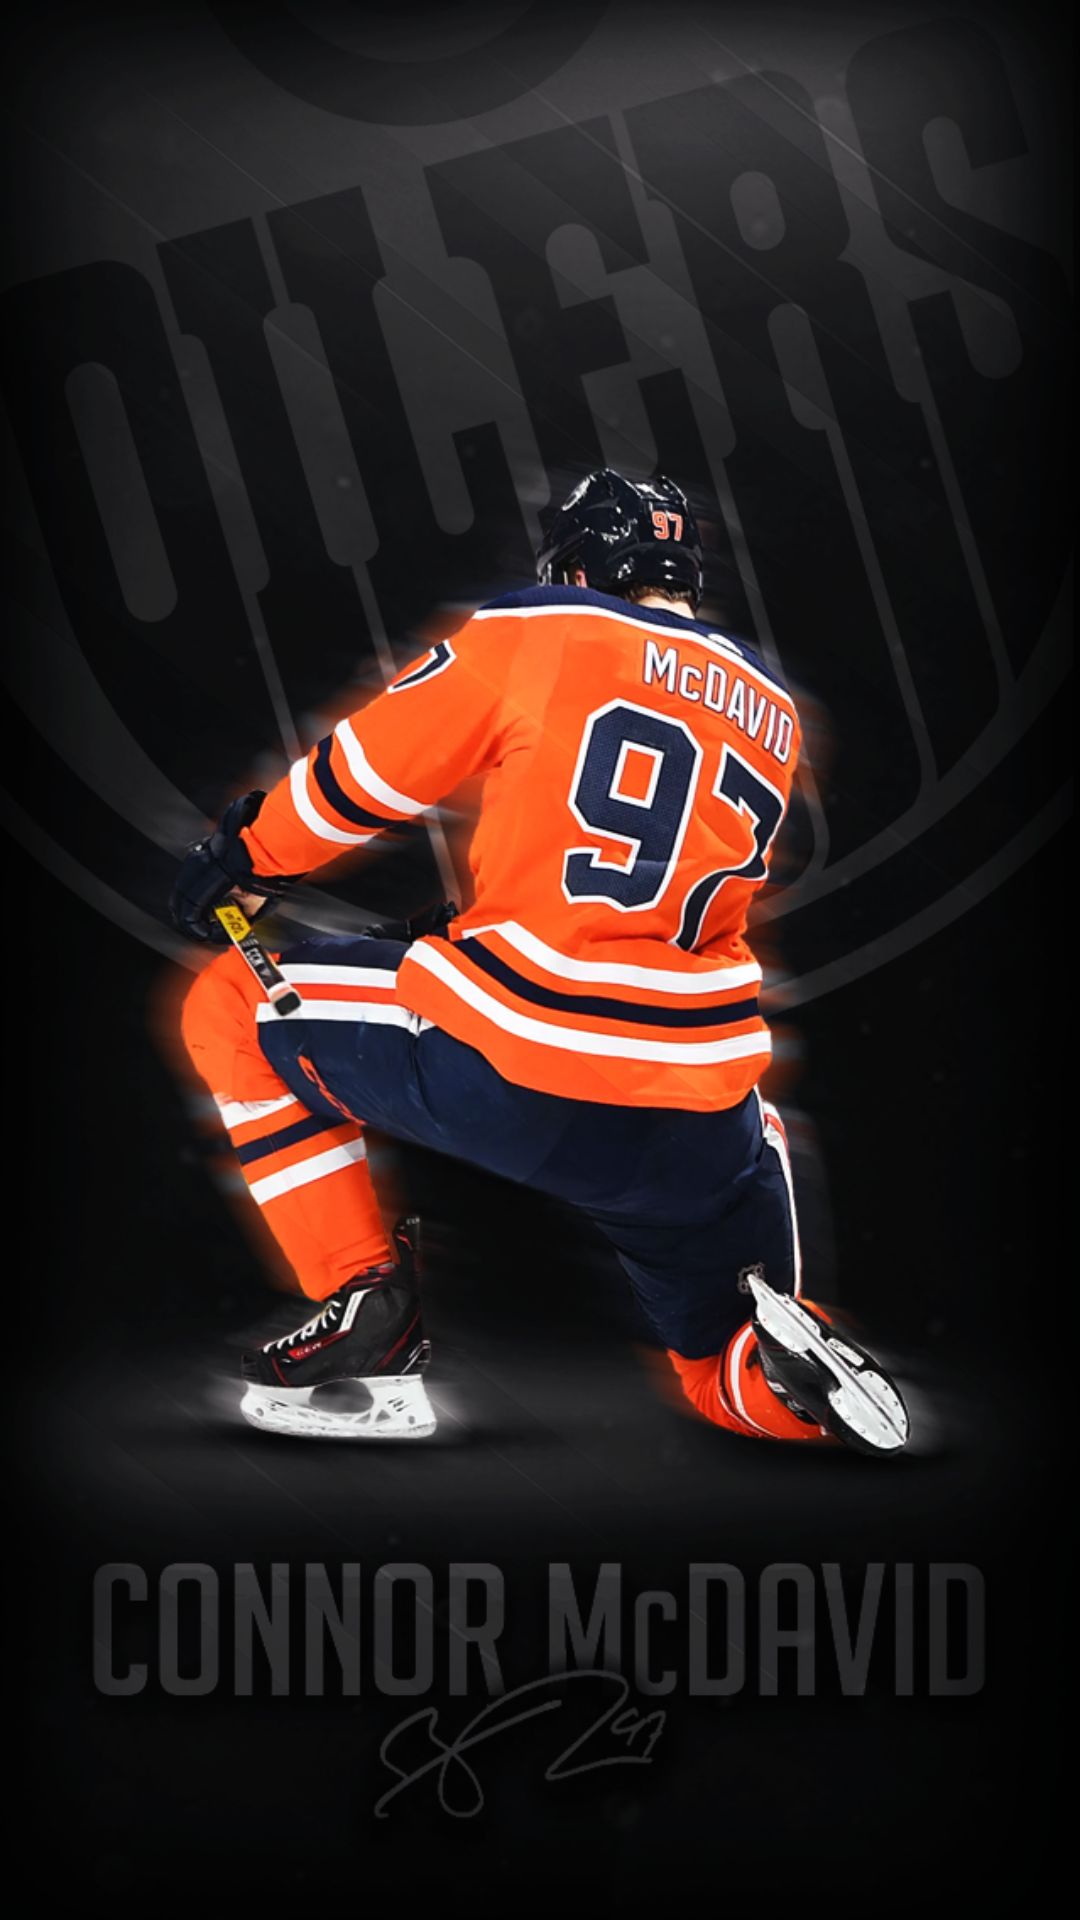 Connor Mcdavid Images